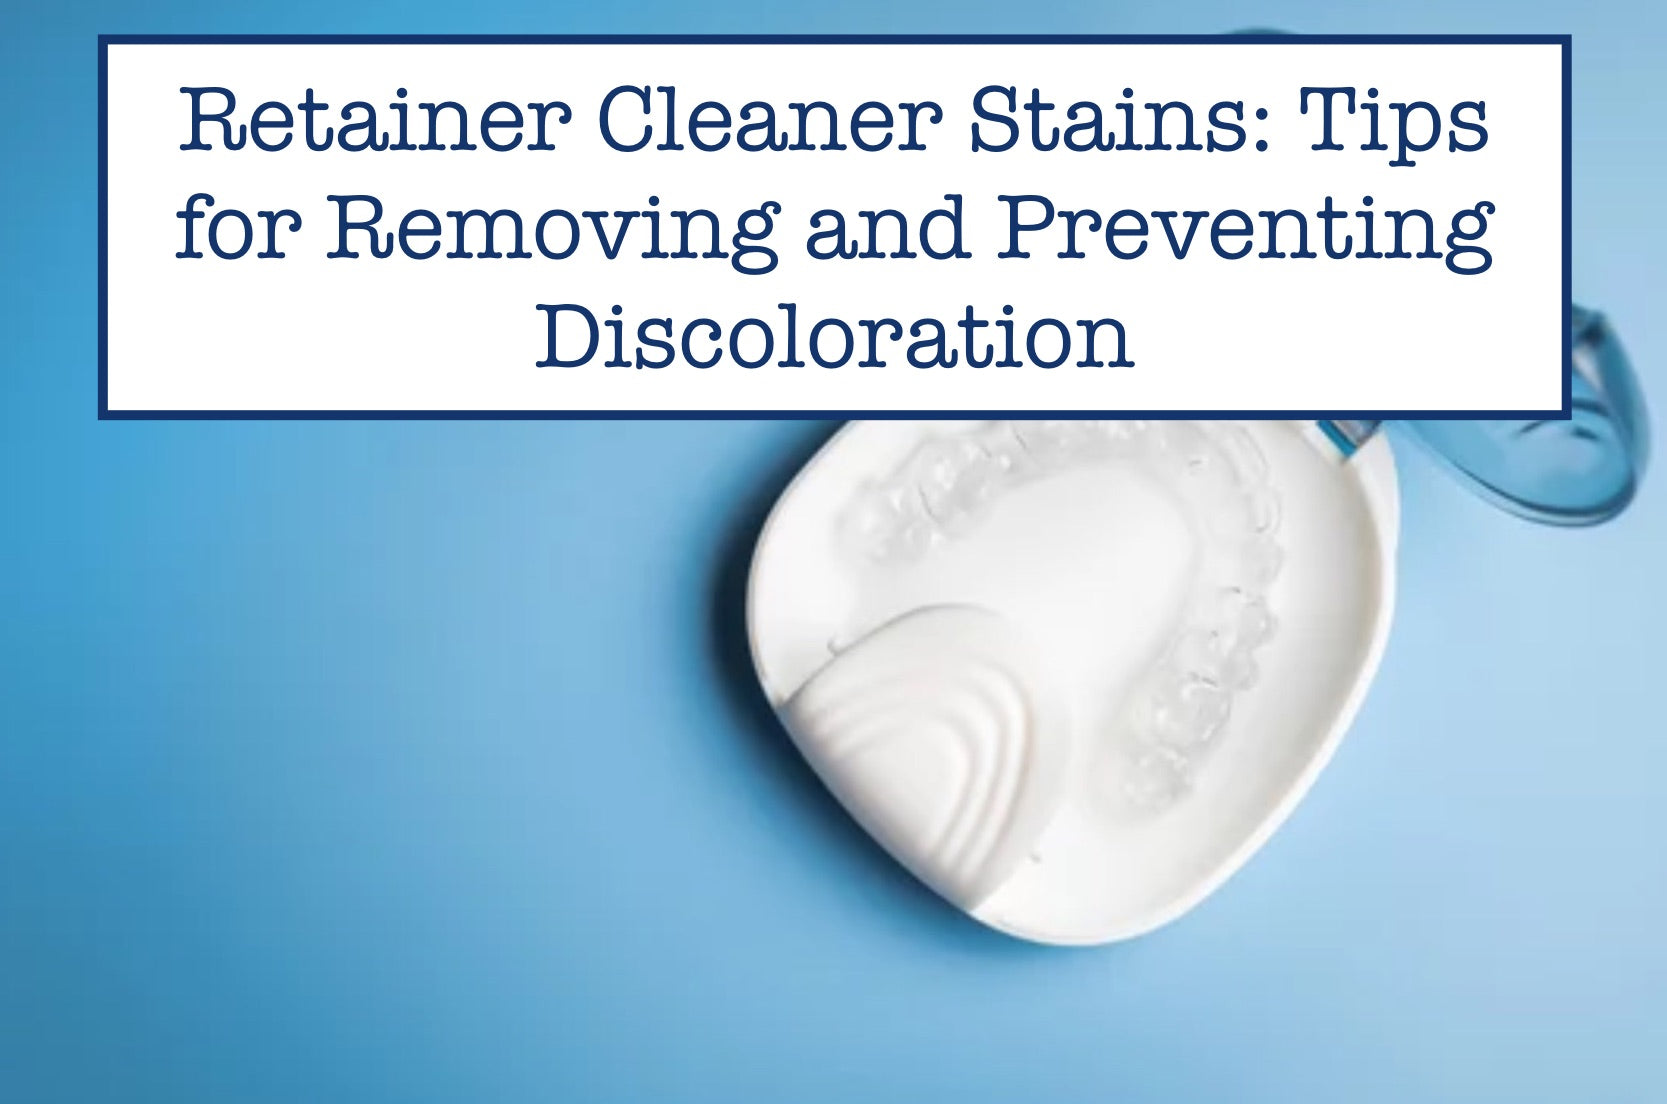 Retainer Cleaner Stains: Tips for Removing and Preventing Discoloration